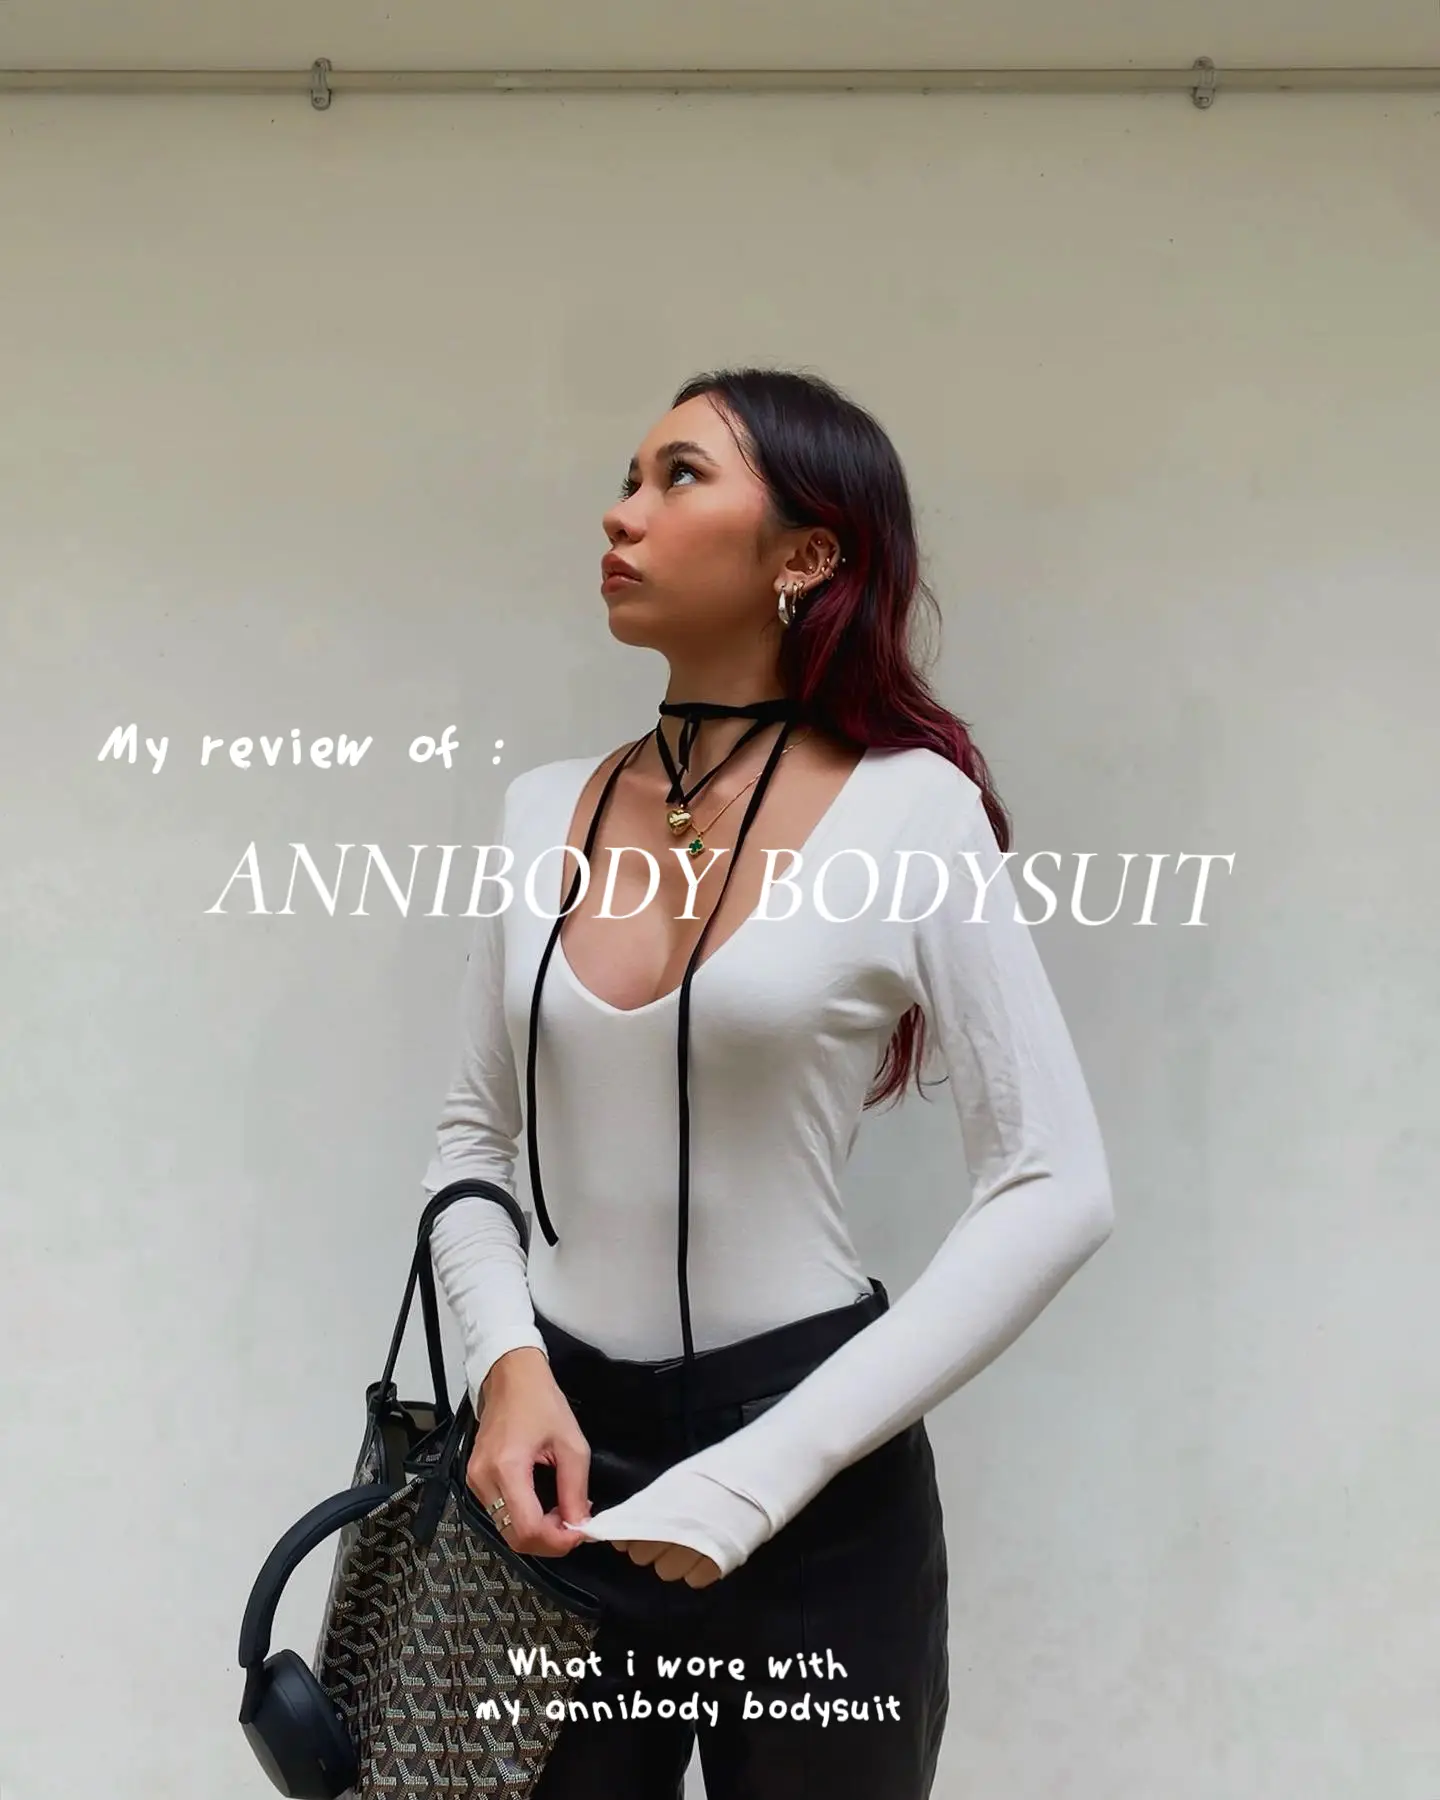 Annibody Bodysuit review! 🤍, Gallery posted by putri